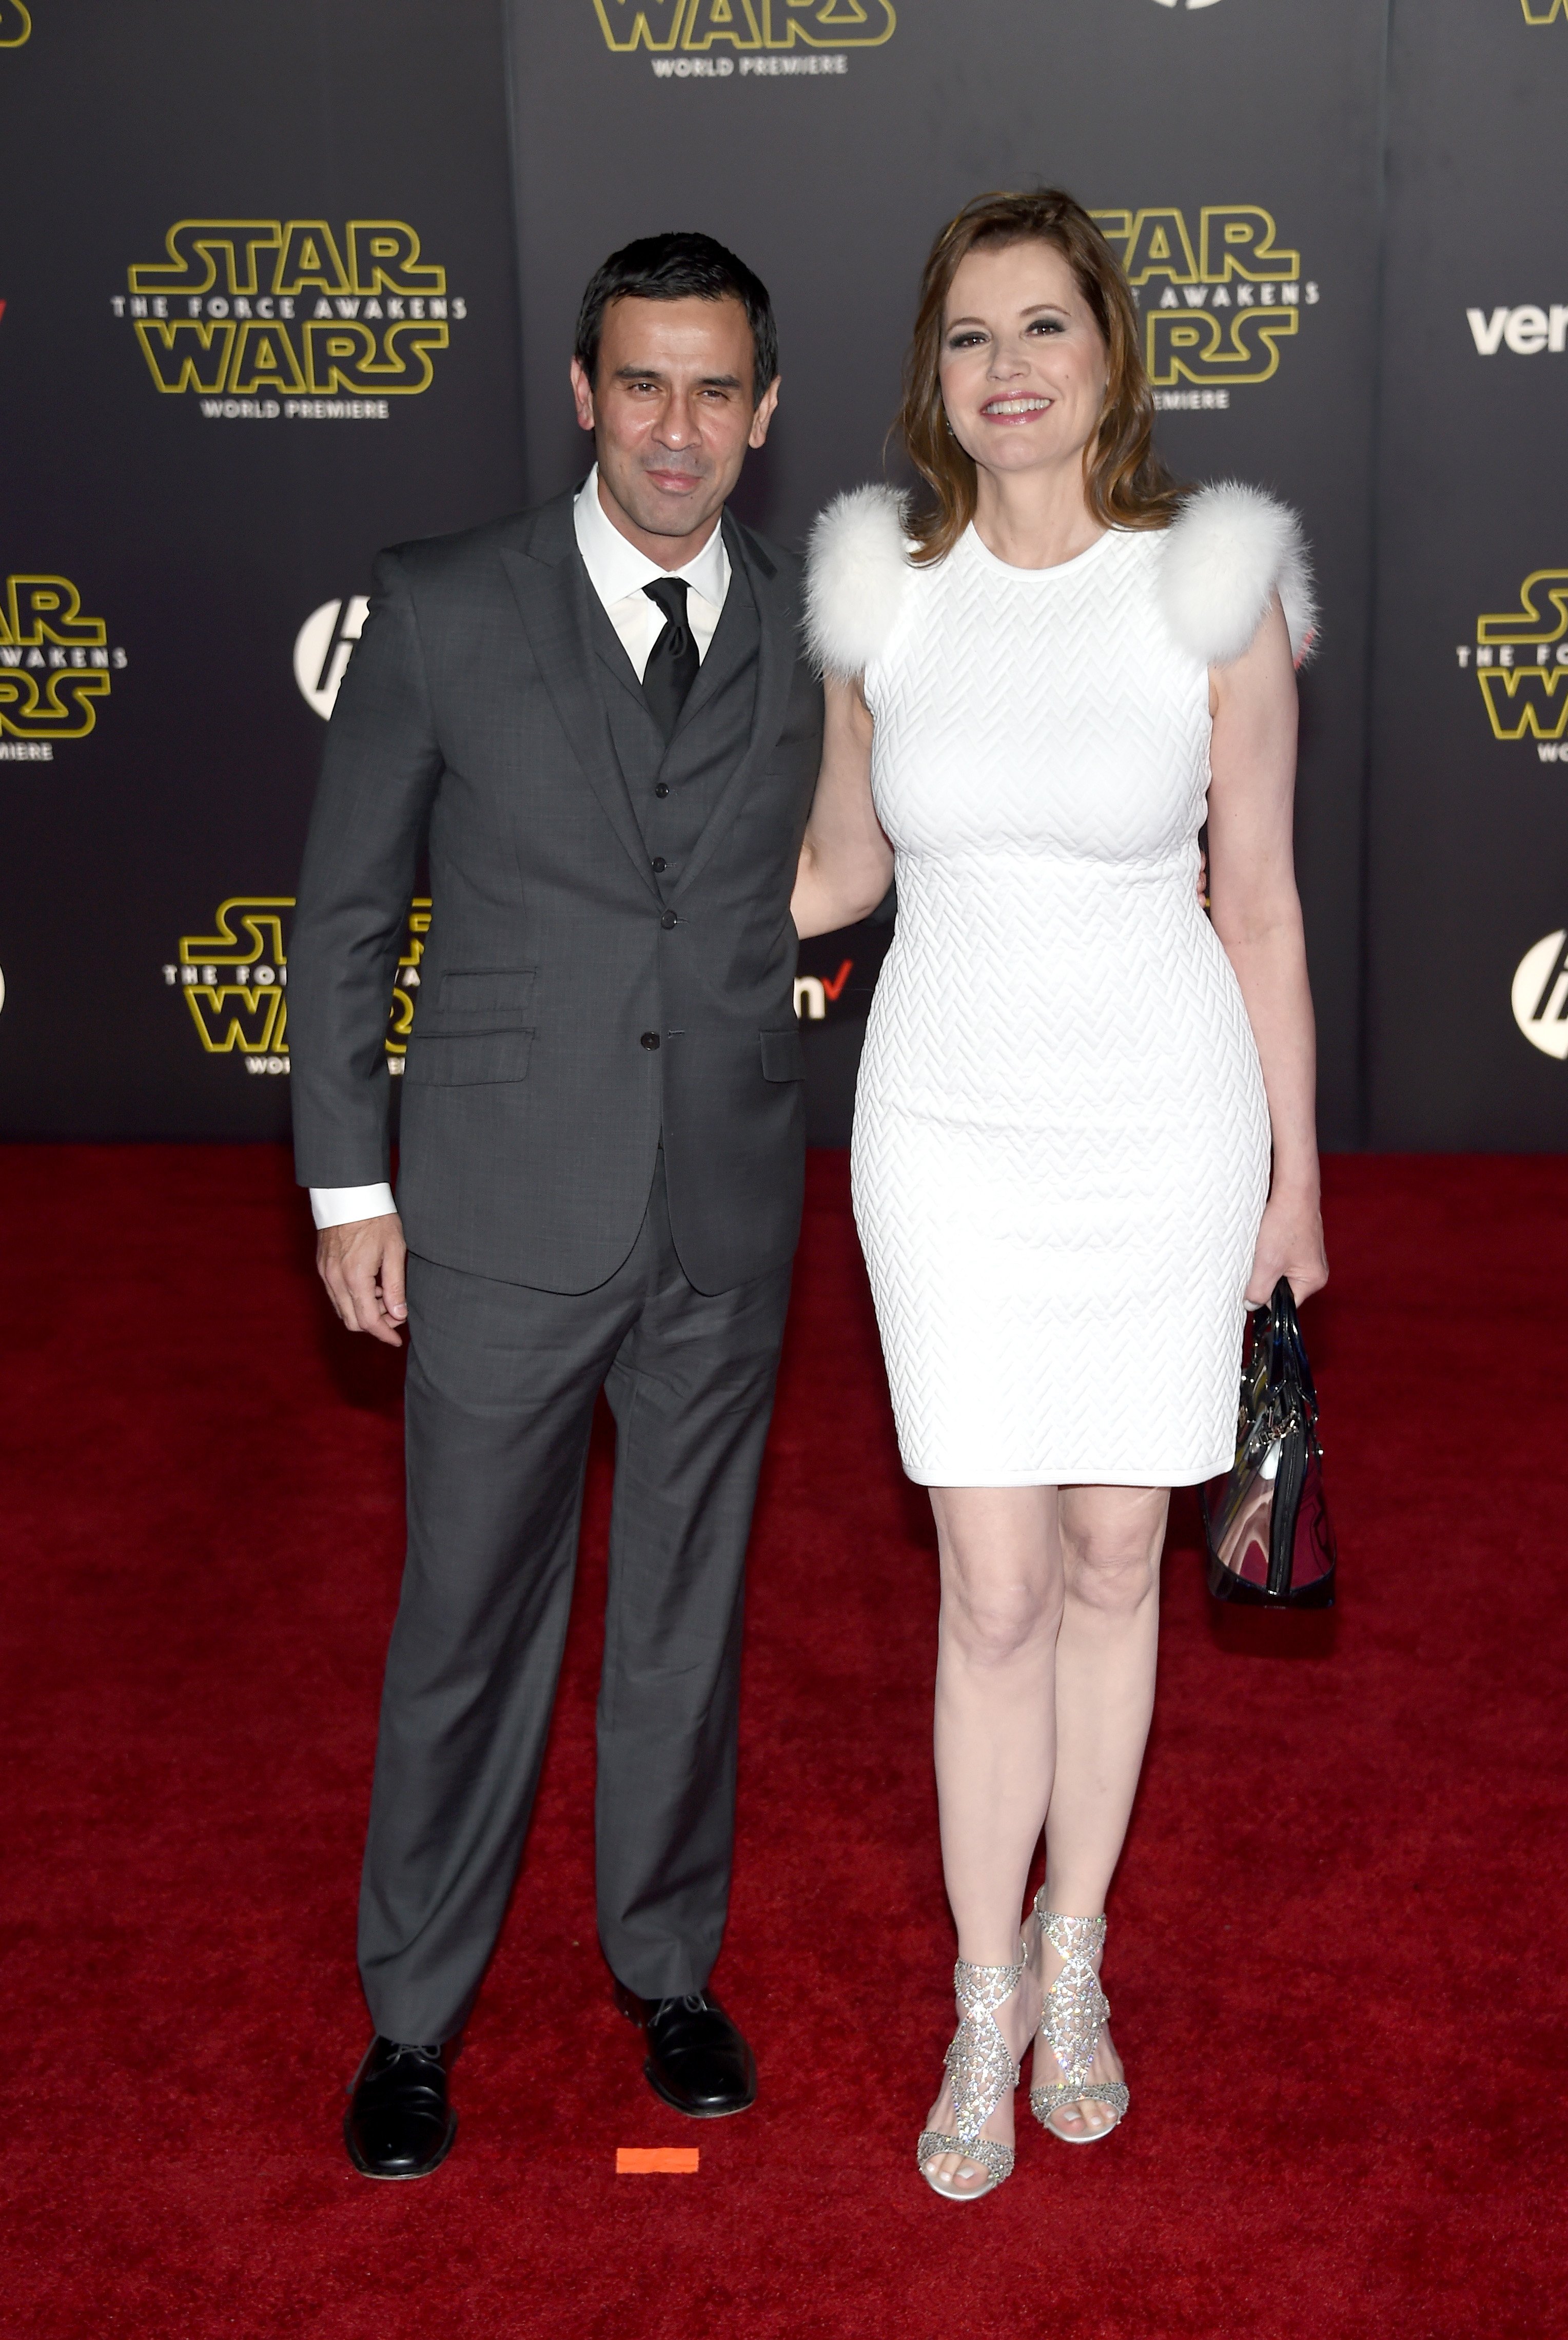 Reza Jarrahy and Geena Davis at the premiere of "Star Wars: The Force Awakens" on December 14, 2015 | Source: Getty Images